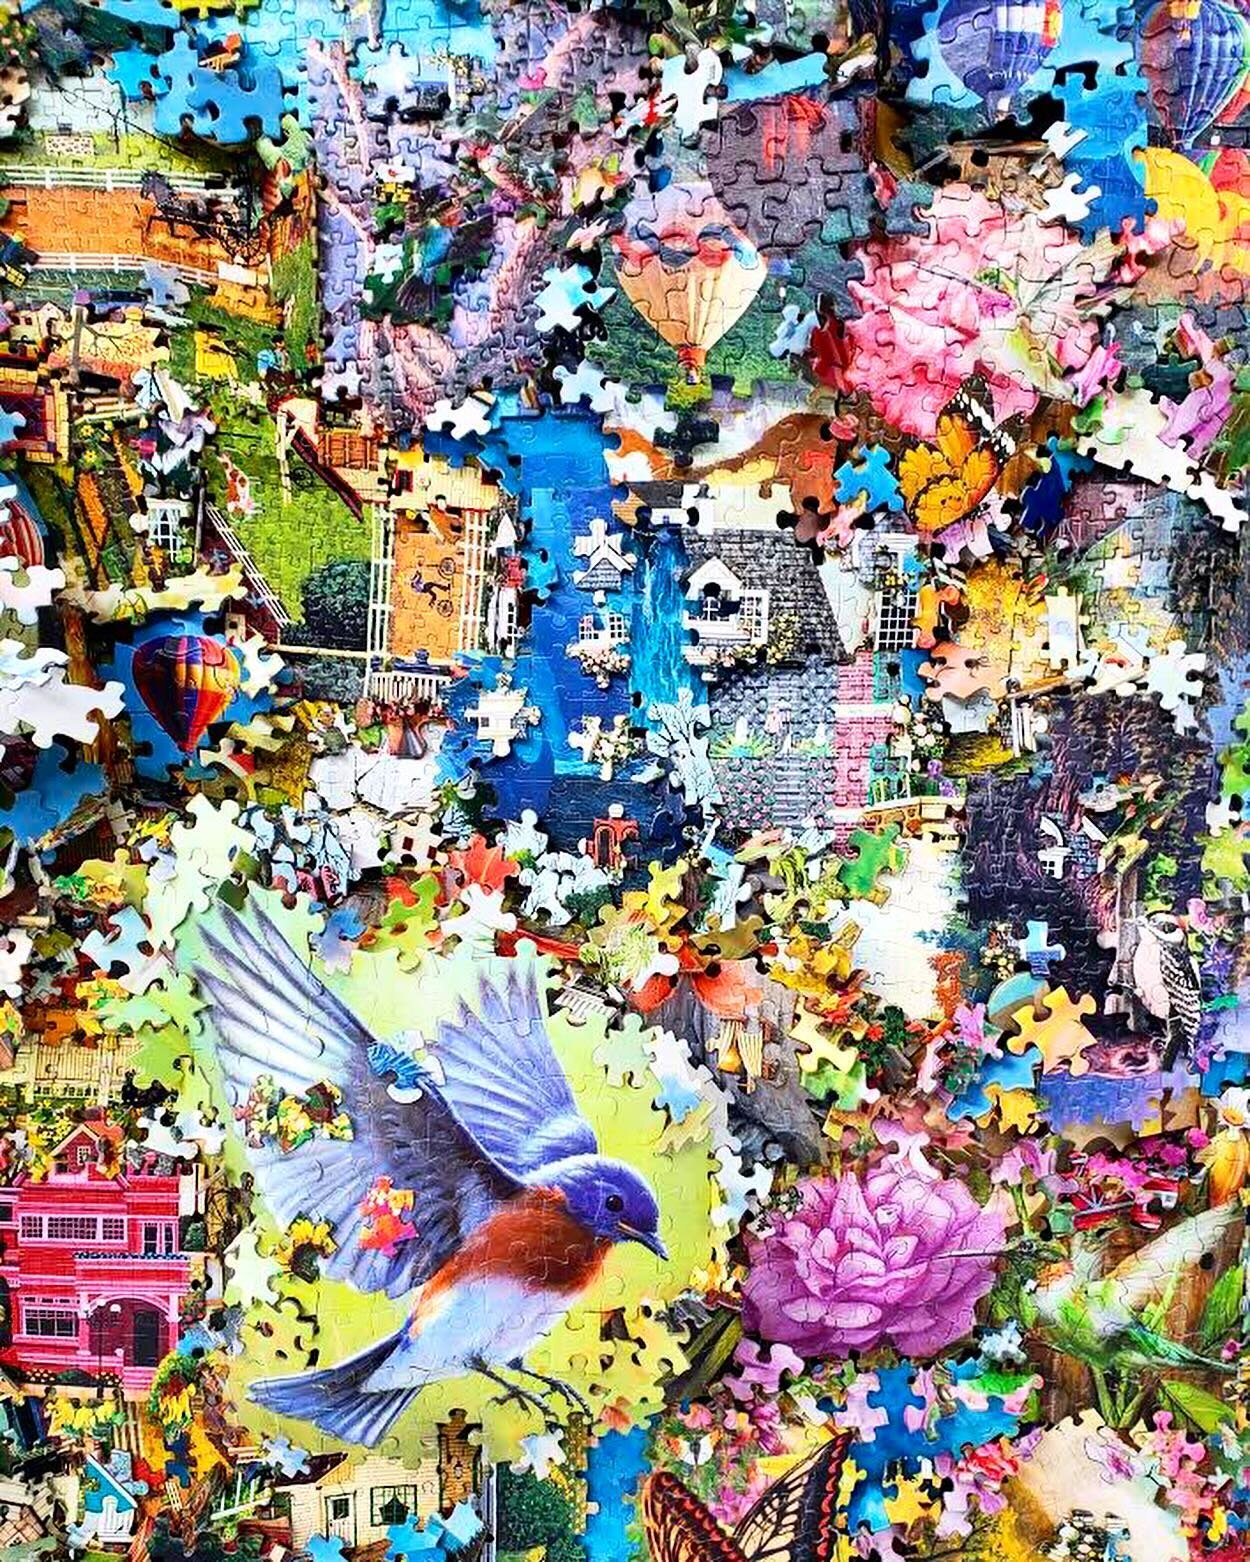 One of @jeffreywilcoxpaclipan&rsquo;s puzzle relief works: Ariel View. This is a large piece and a must see. #3d 🌺🦋🦜

#art #artist #jeffreywilcoxpaclipan #wall #sculpture #sculptural #bigart #puzzle #discoandart #spring #birds #butterfly #flowers 